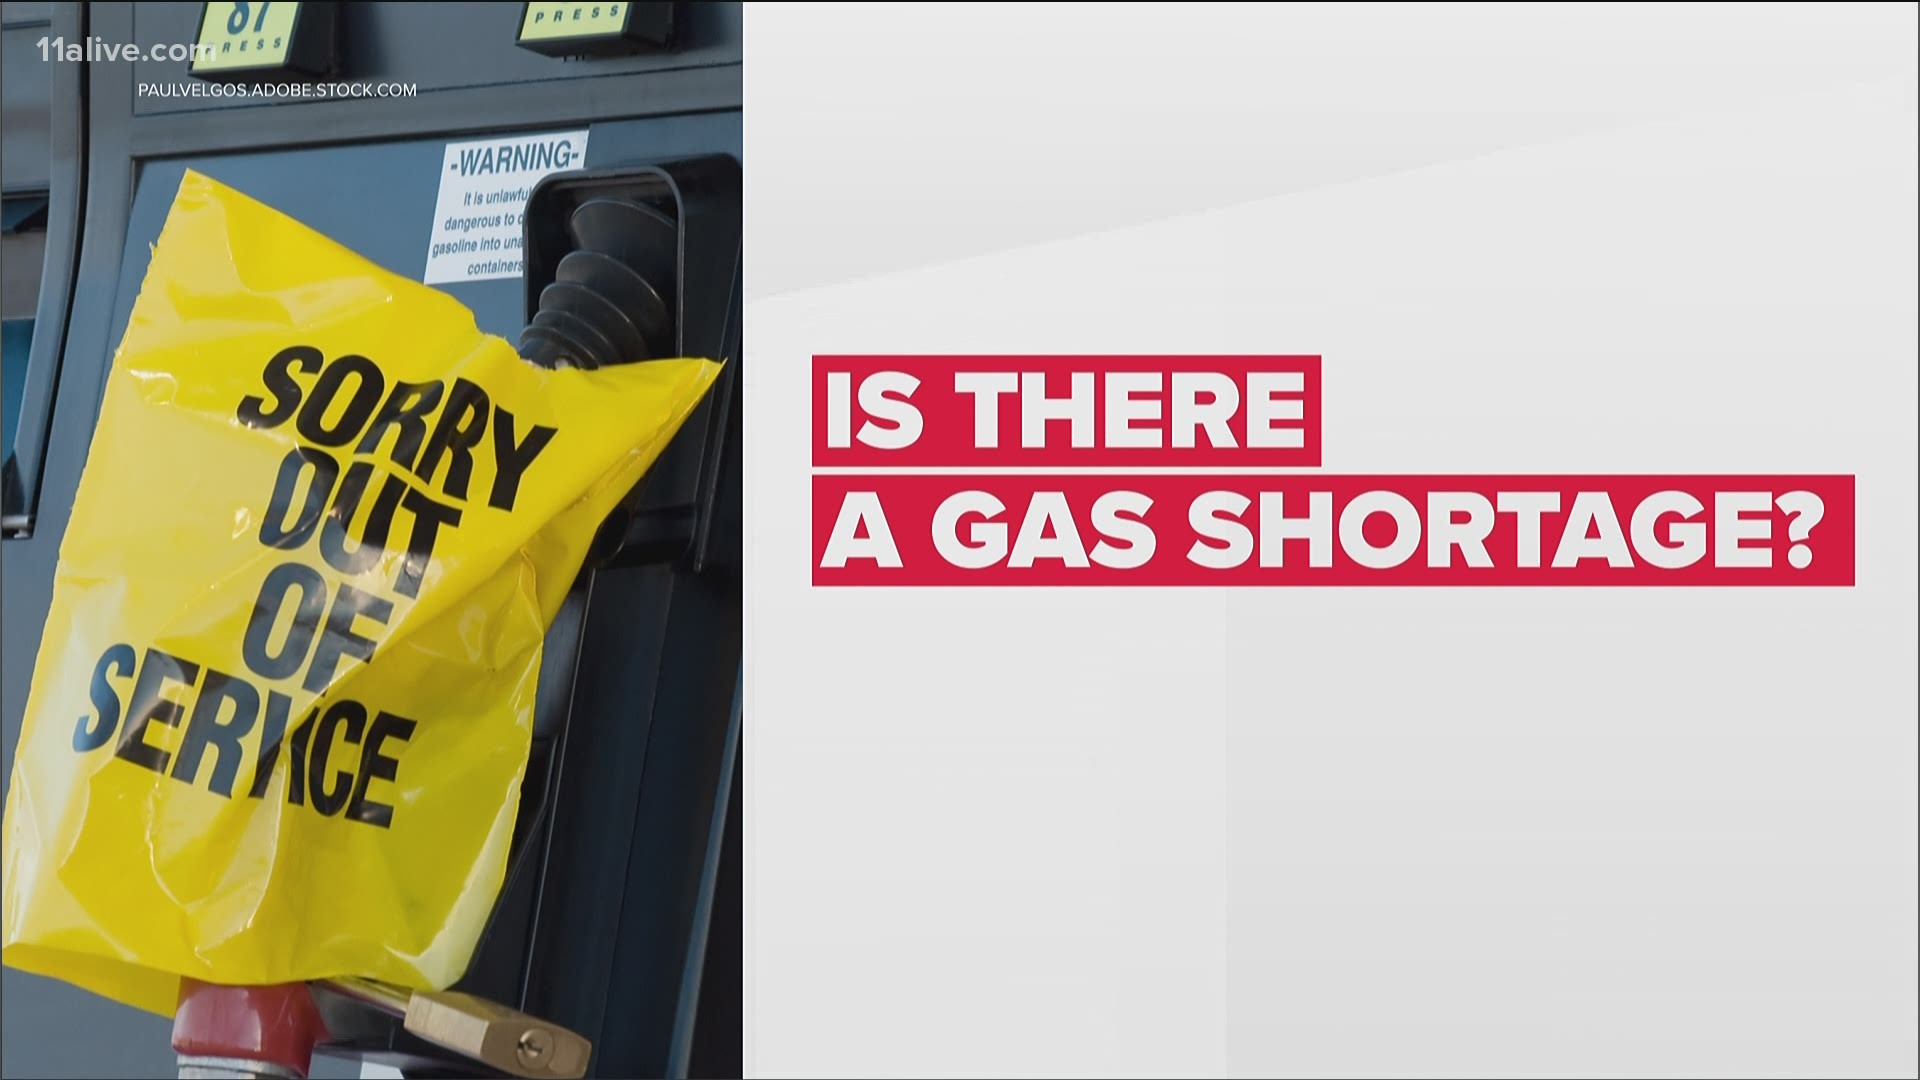 Heading into the July 4th holiday weekend.... there have been some rumors about a gas shortage.